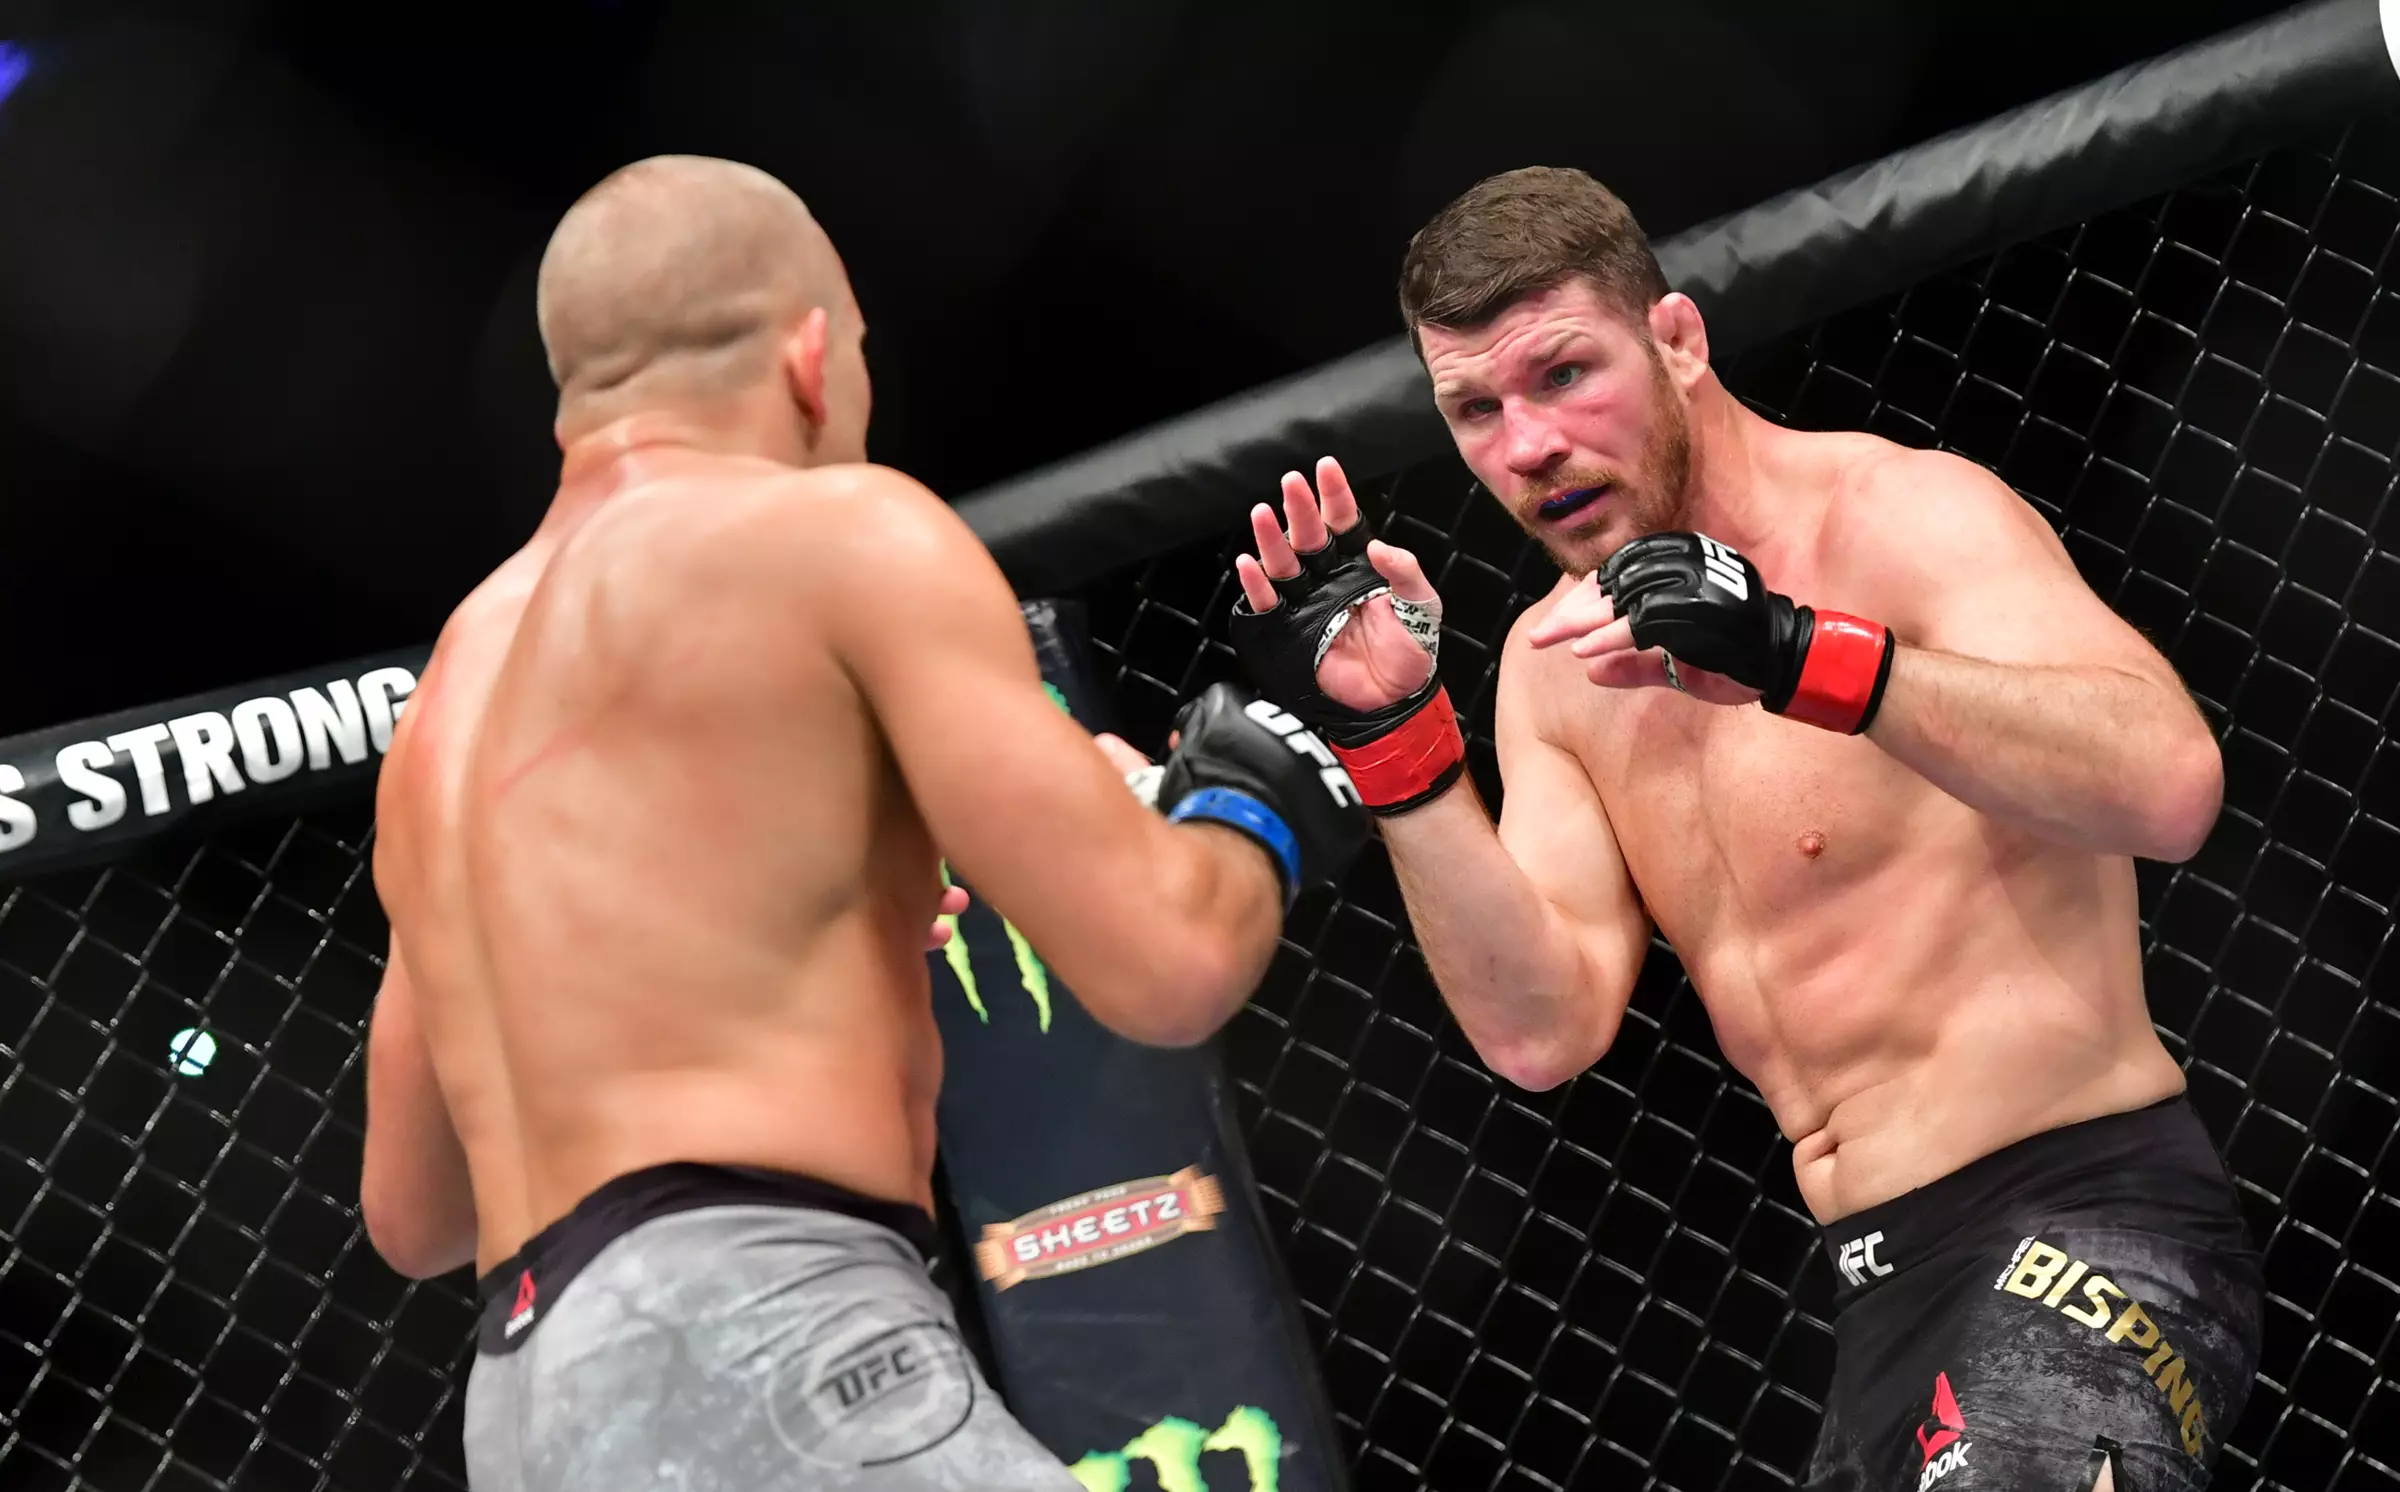 Michael Bisping retired in 2017 and is one of the greatest British fighters ever